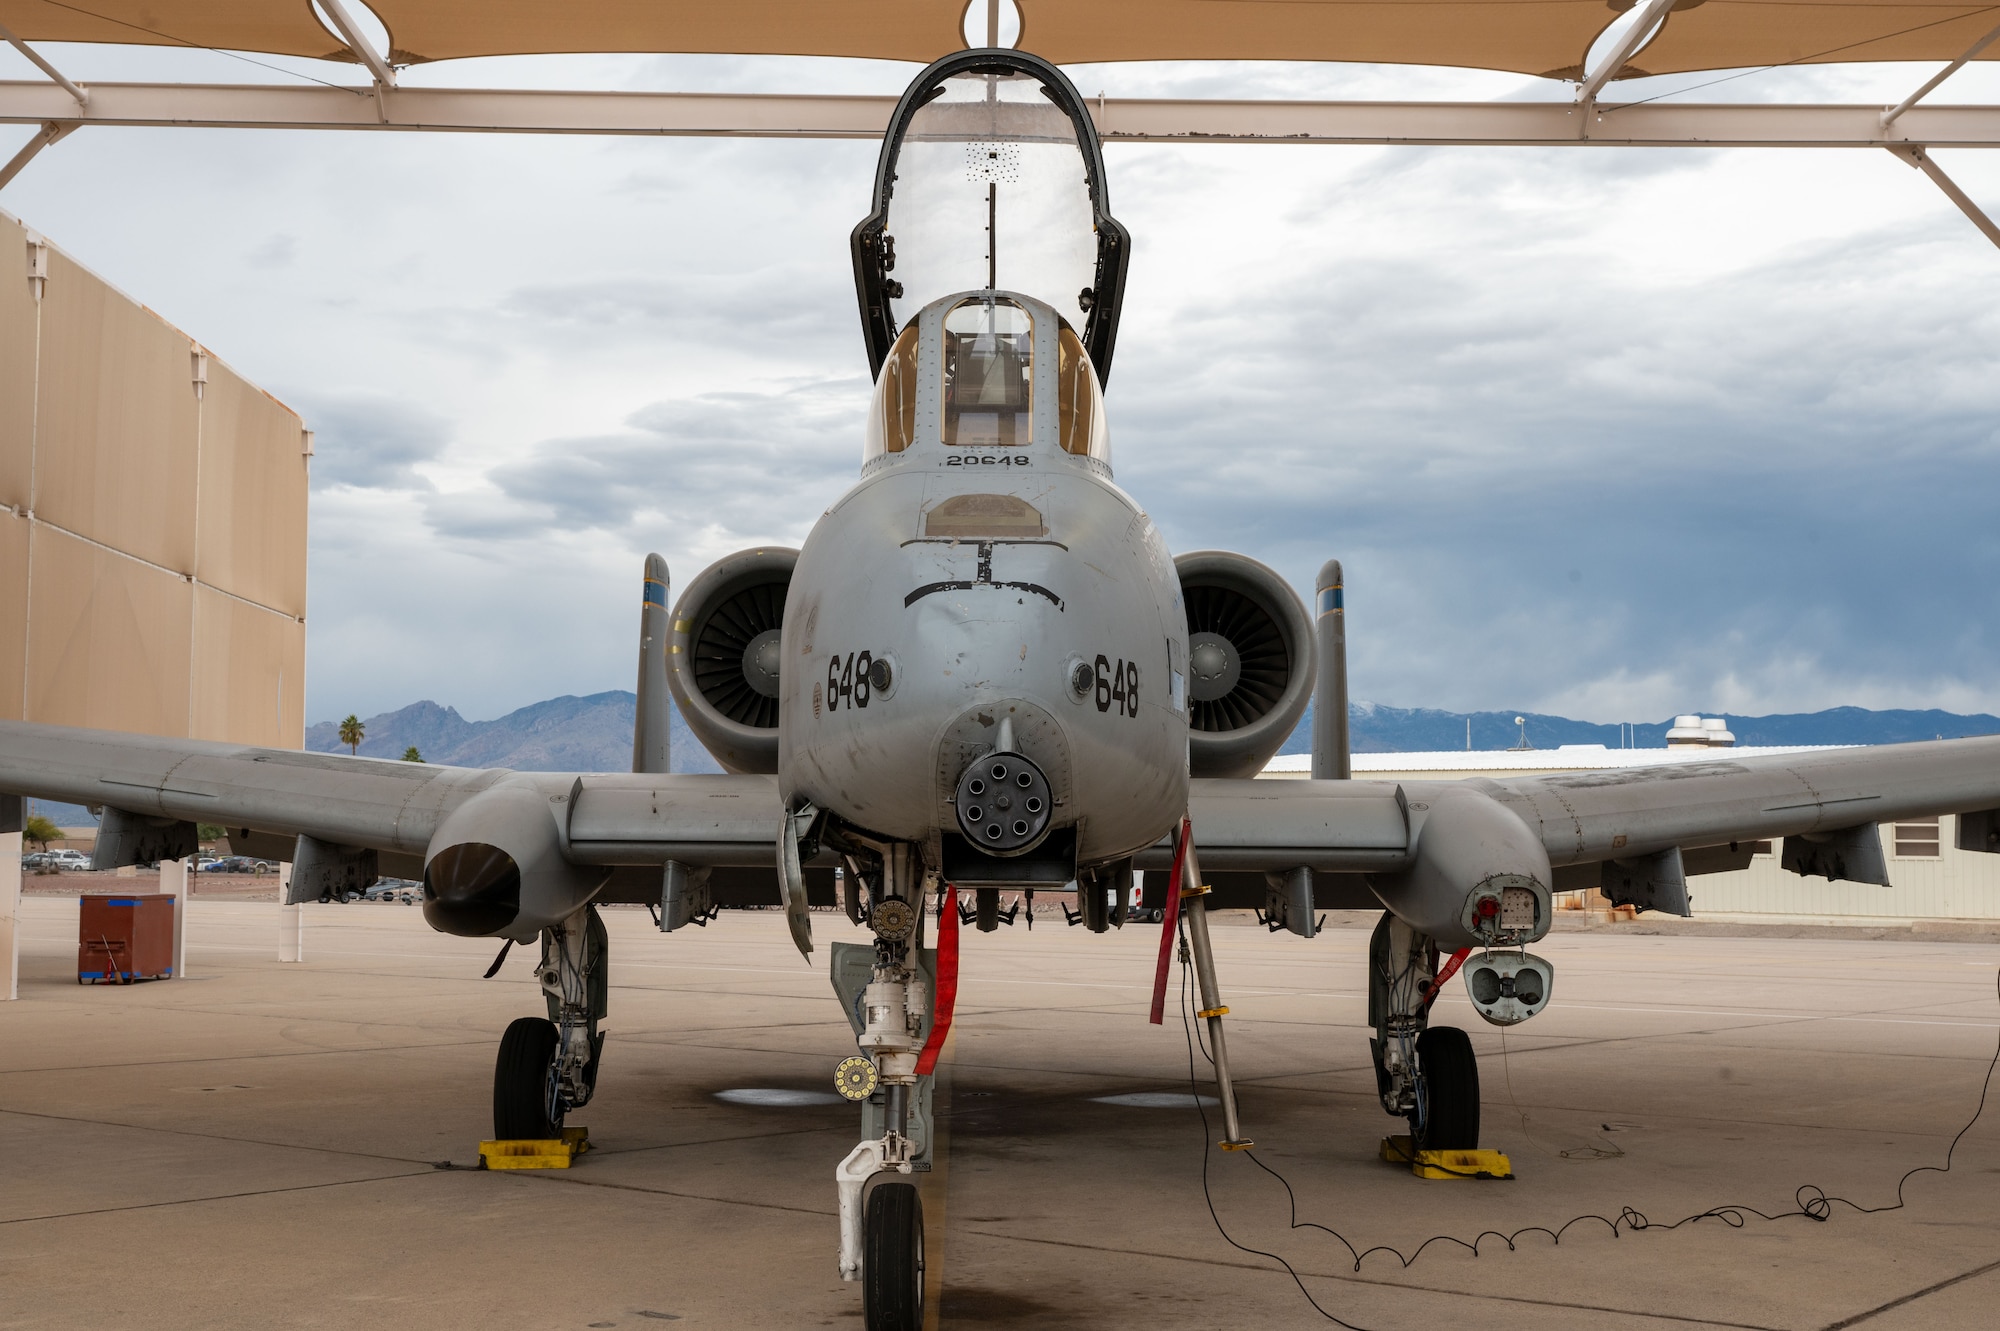 An A-10C Thunderbolt II aircraft prior to divestment at Davis-Monthan Air Force Base, Ariz., Feb. 6, 2024. Aircraft 82-648 was retired from service and transited to the 309th Aerospace Maintenance and Regeneration Group. (U.S. Air Force photo by Airman 1st Class Robert Allen Cooke III)